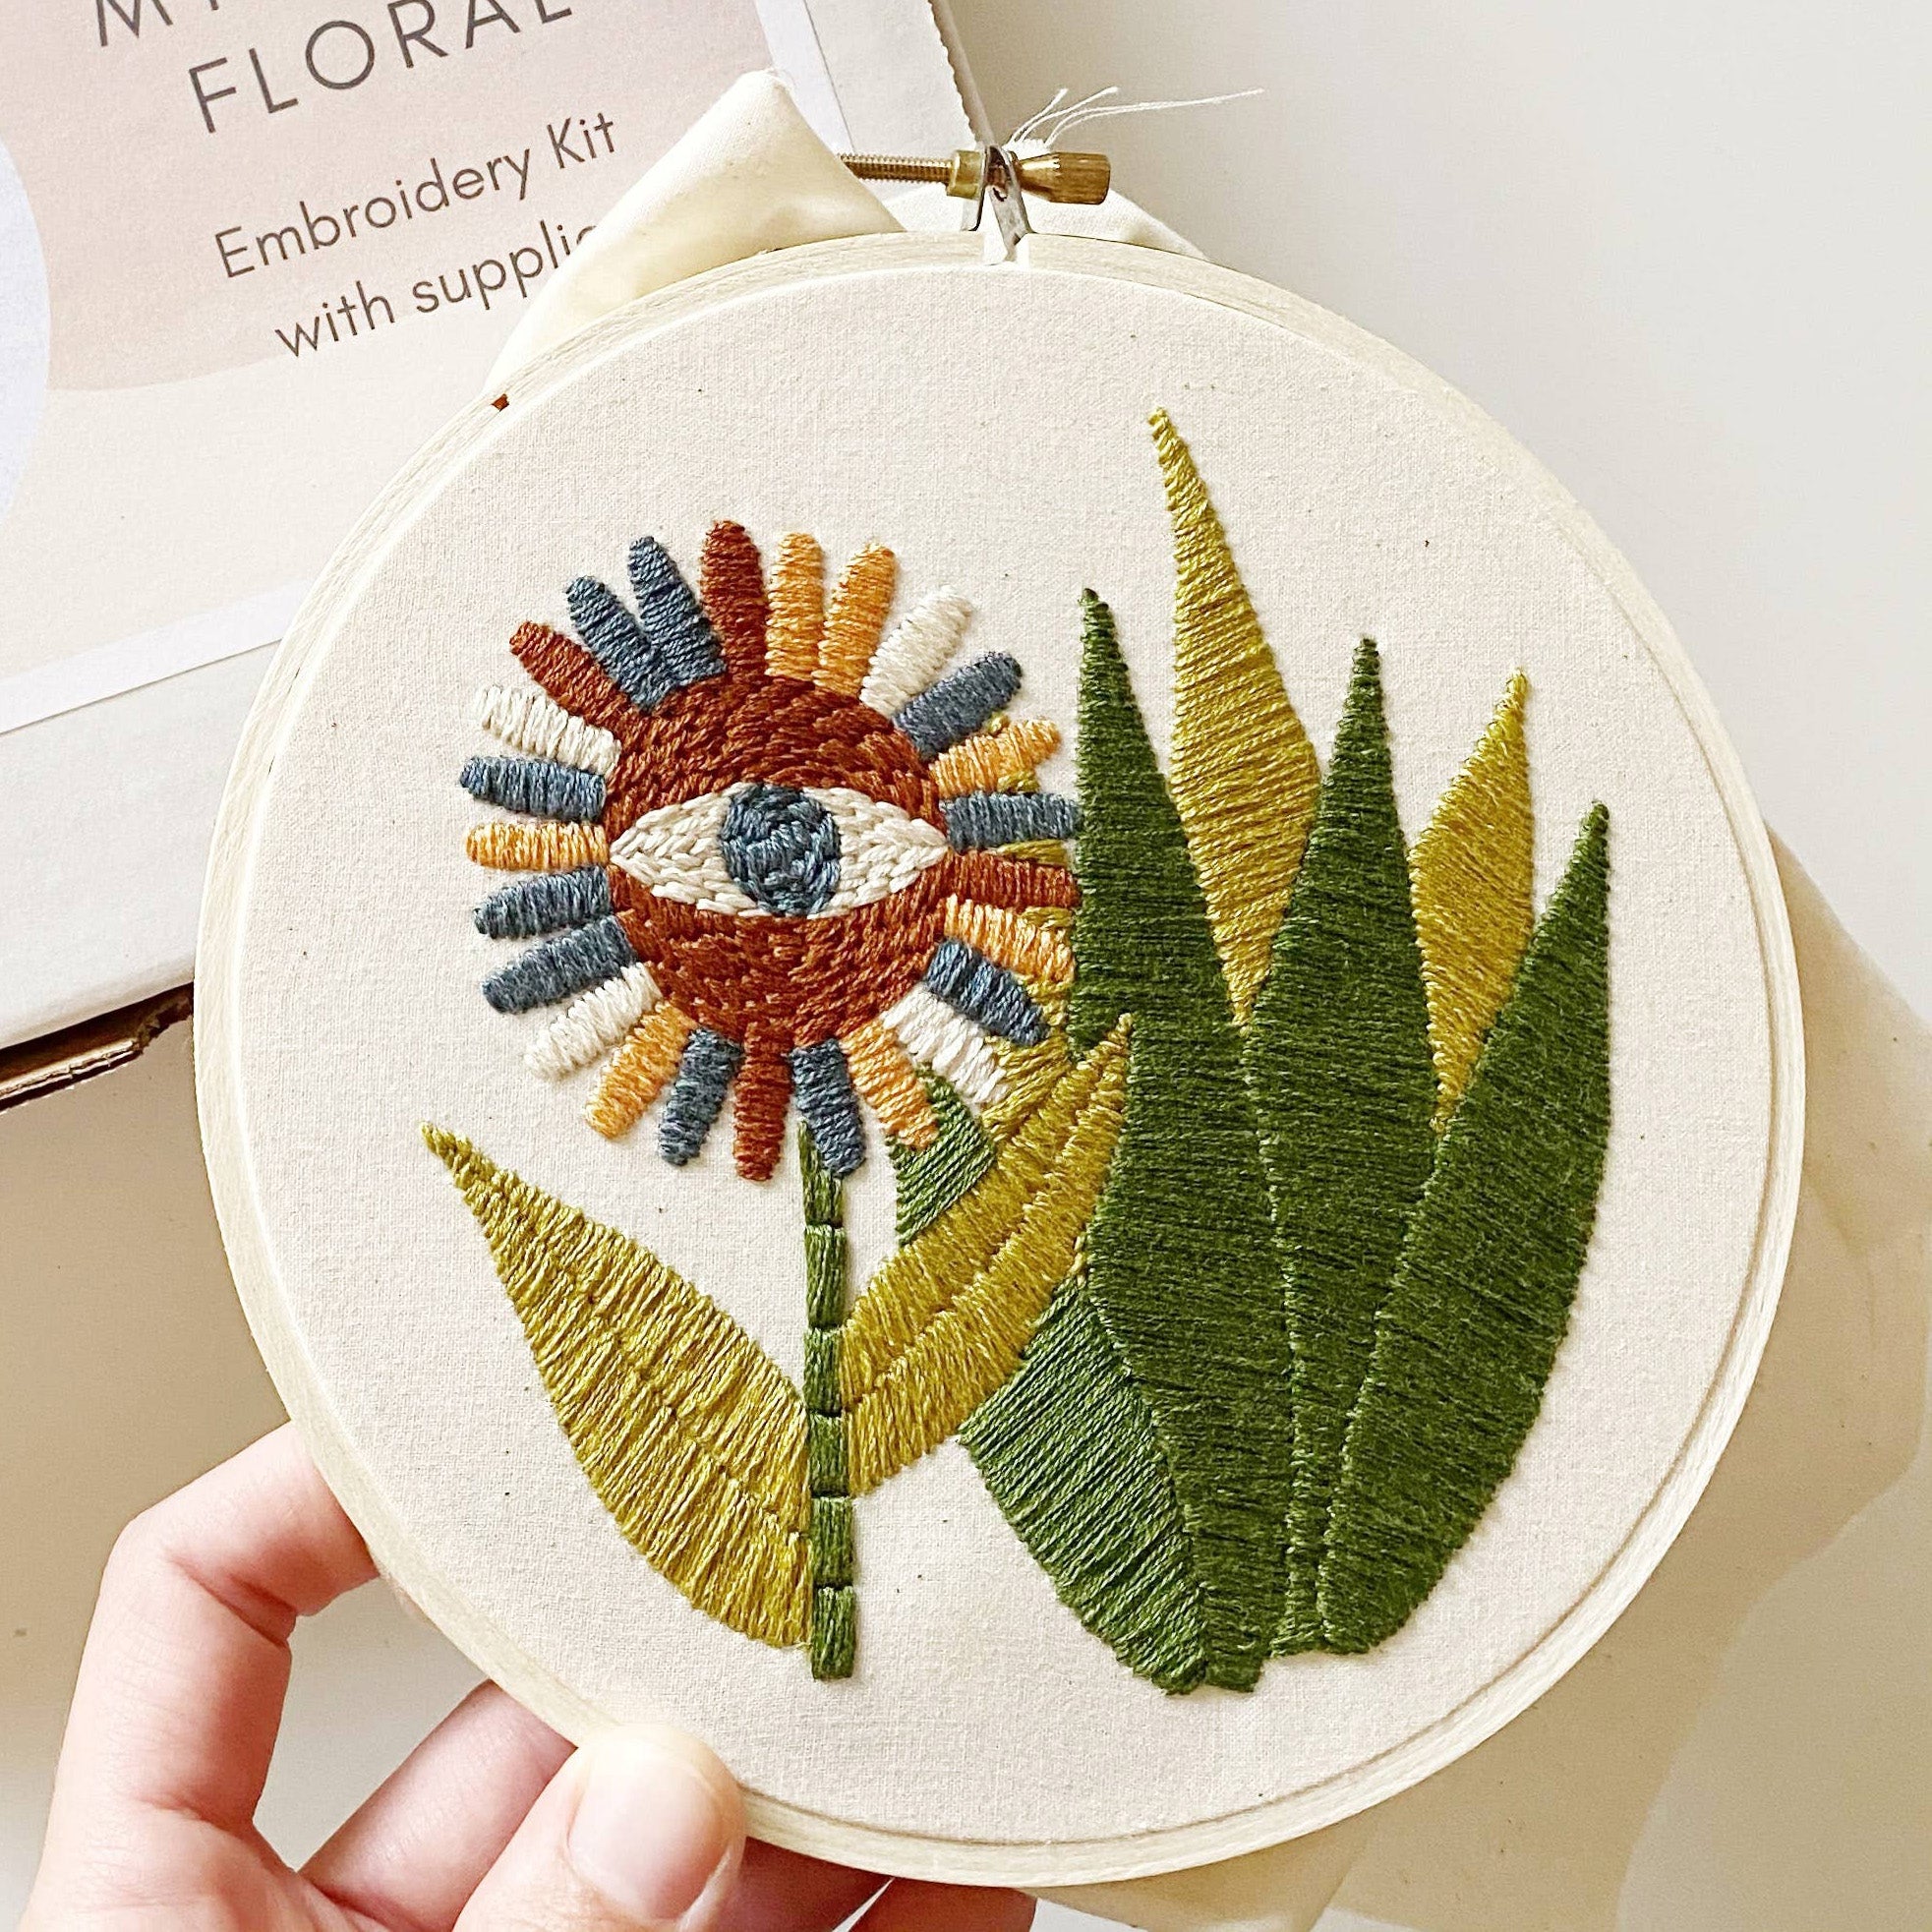 Flower Crown Hand Embroidery Kit - Stitched Modern